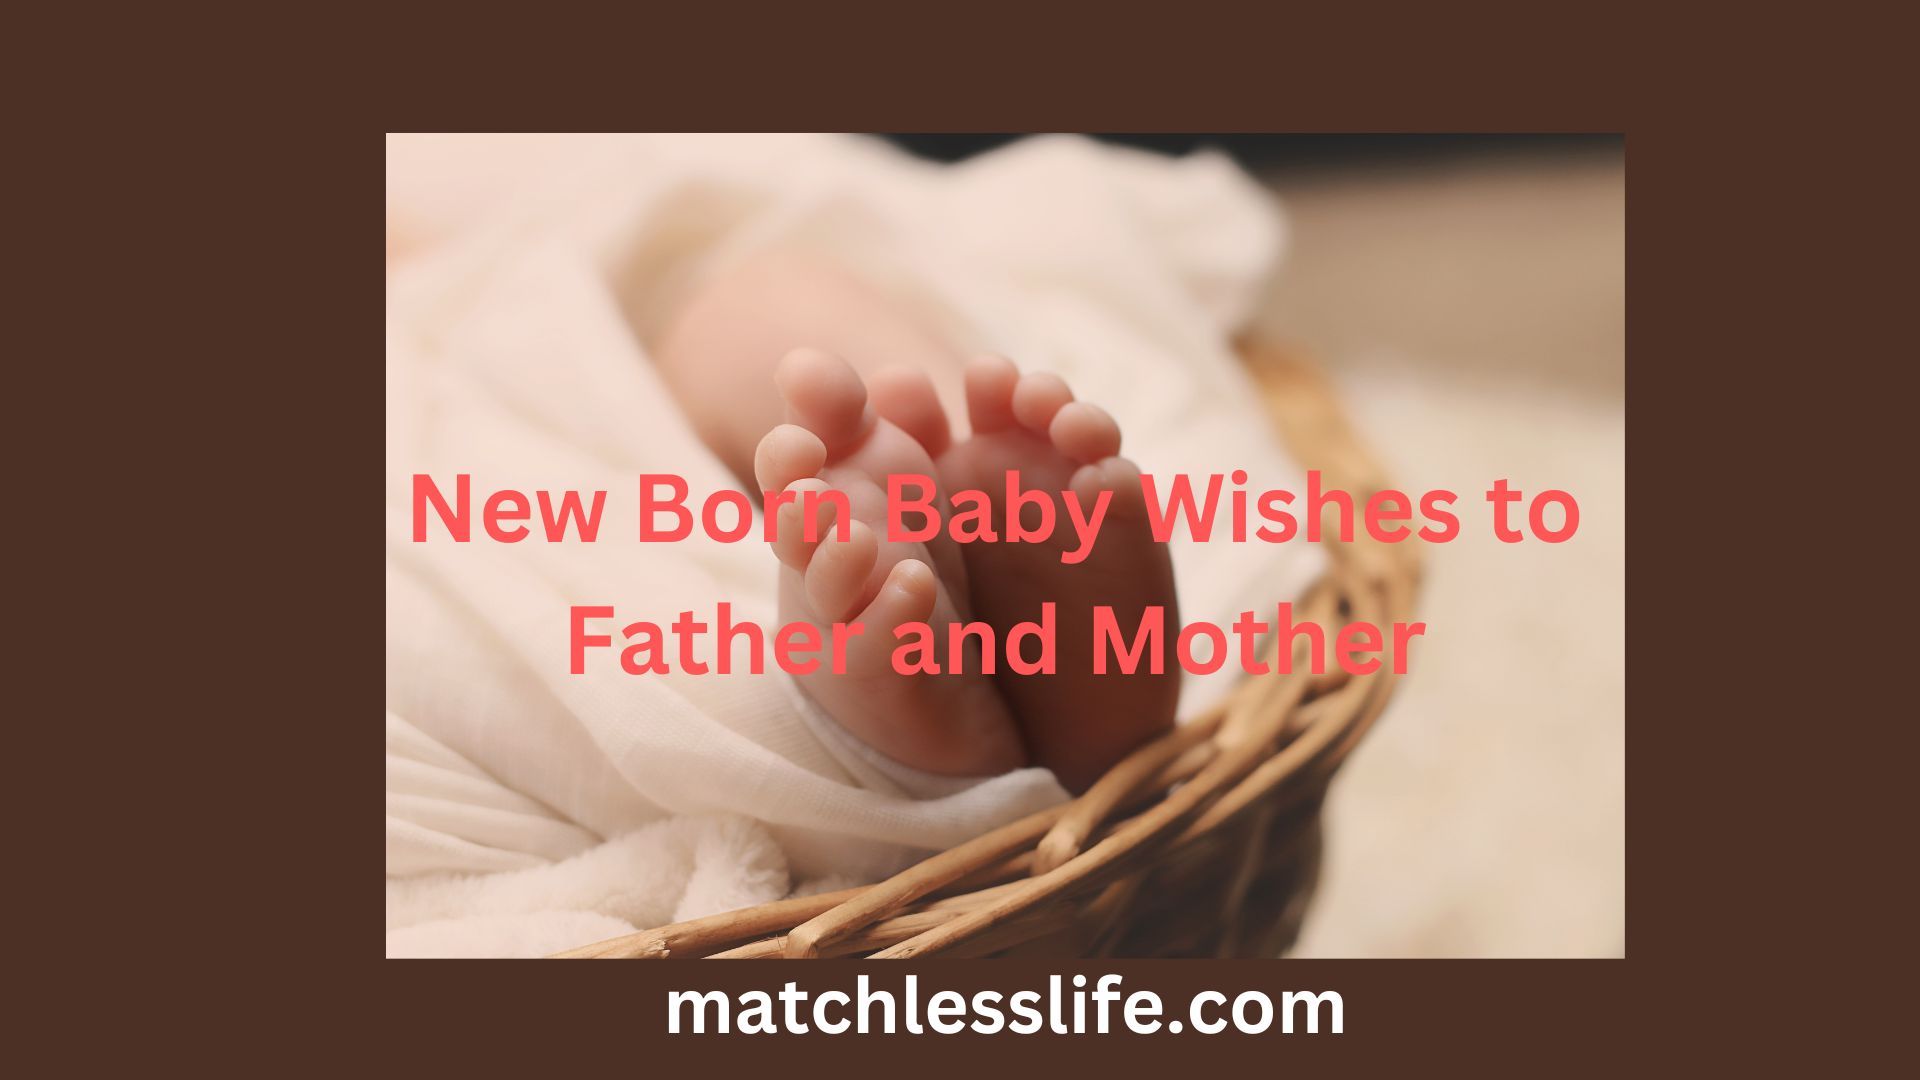 New Born Baby Wishes to Father and Mother